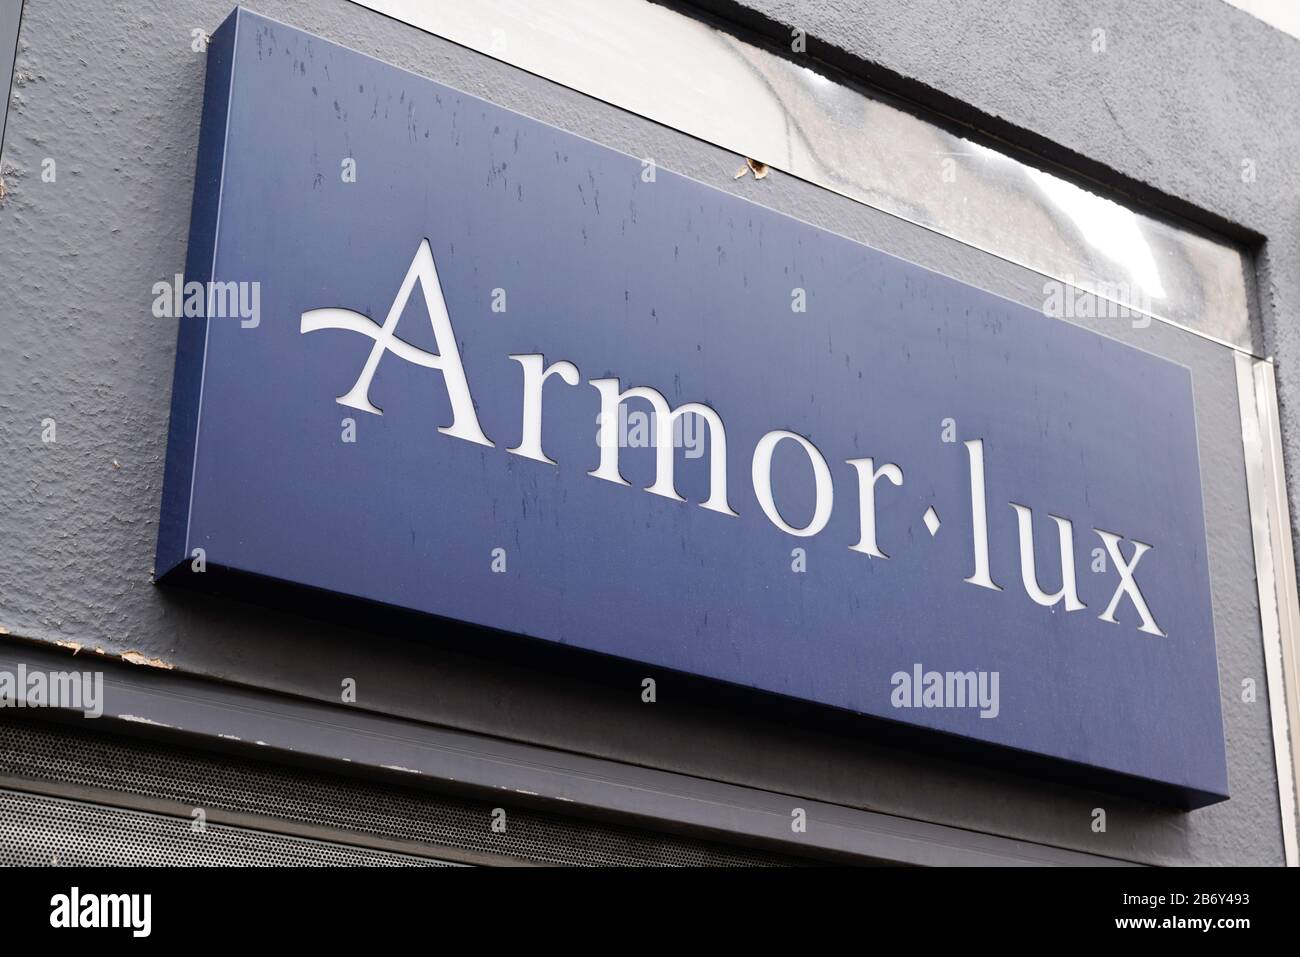 Bordeaux , Aquitaine / France - 02 20 2020 : Armor Lux sign logo store  clothing french fashion shop brand inspired by ocean sea marine concept  Stock Photo - Alamy